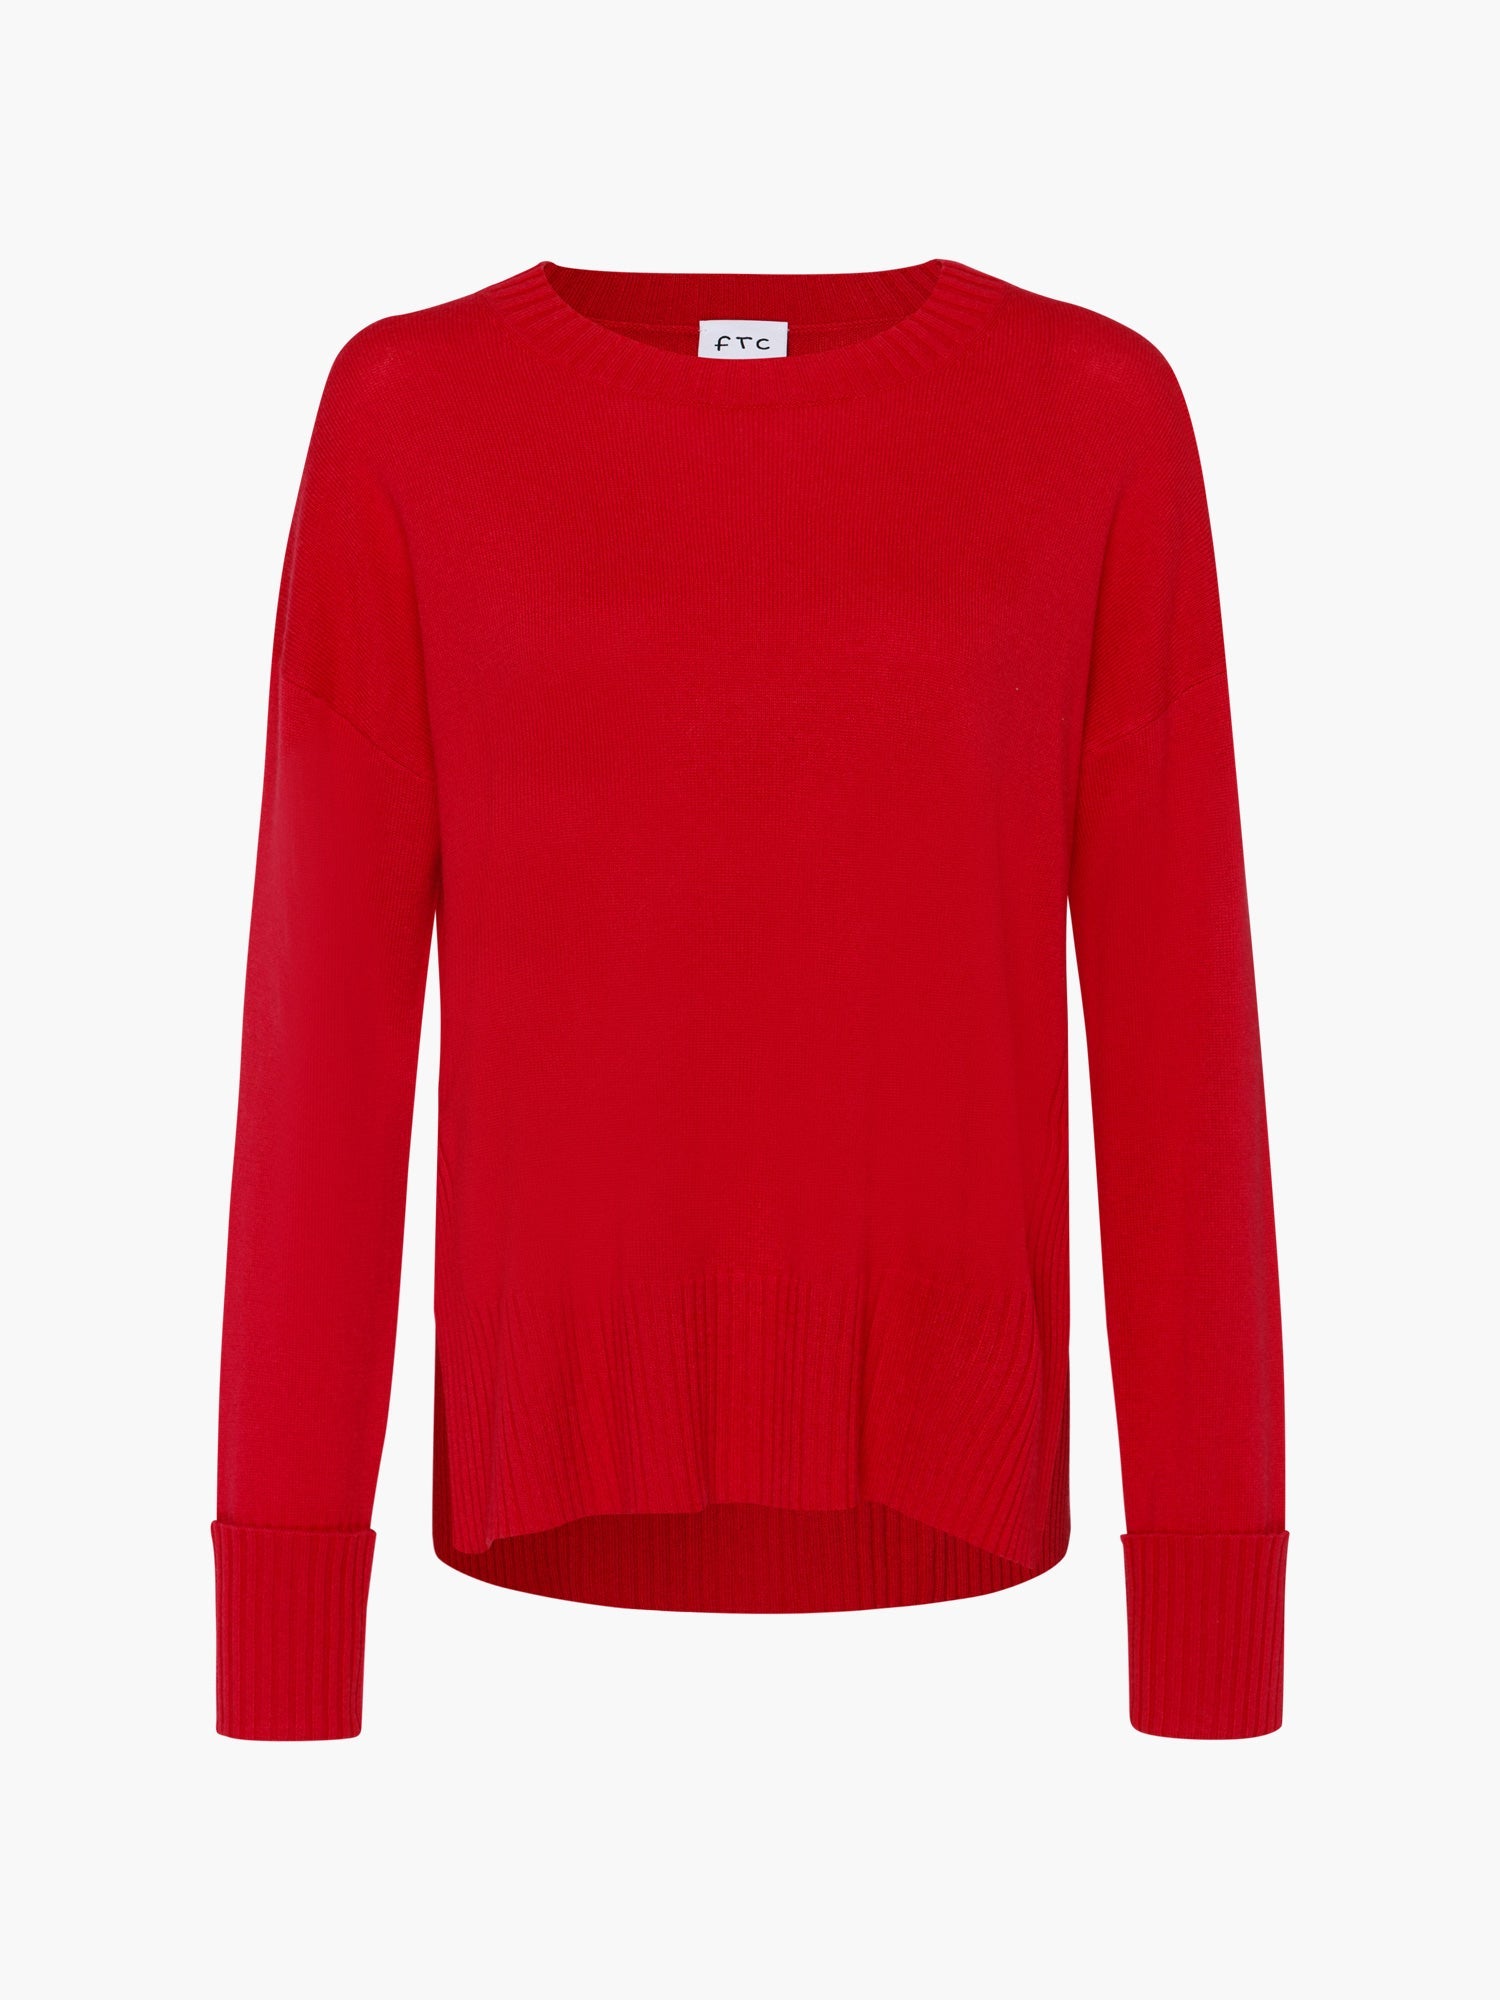 FTC-Cashmere-OUTLET-SALE-Pullover-RN-Strick-ARCHIVE-COLLECTION_e76a8df7-ed4d-4823-a50e-79761416250b.jpg